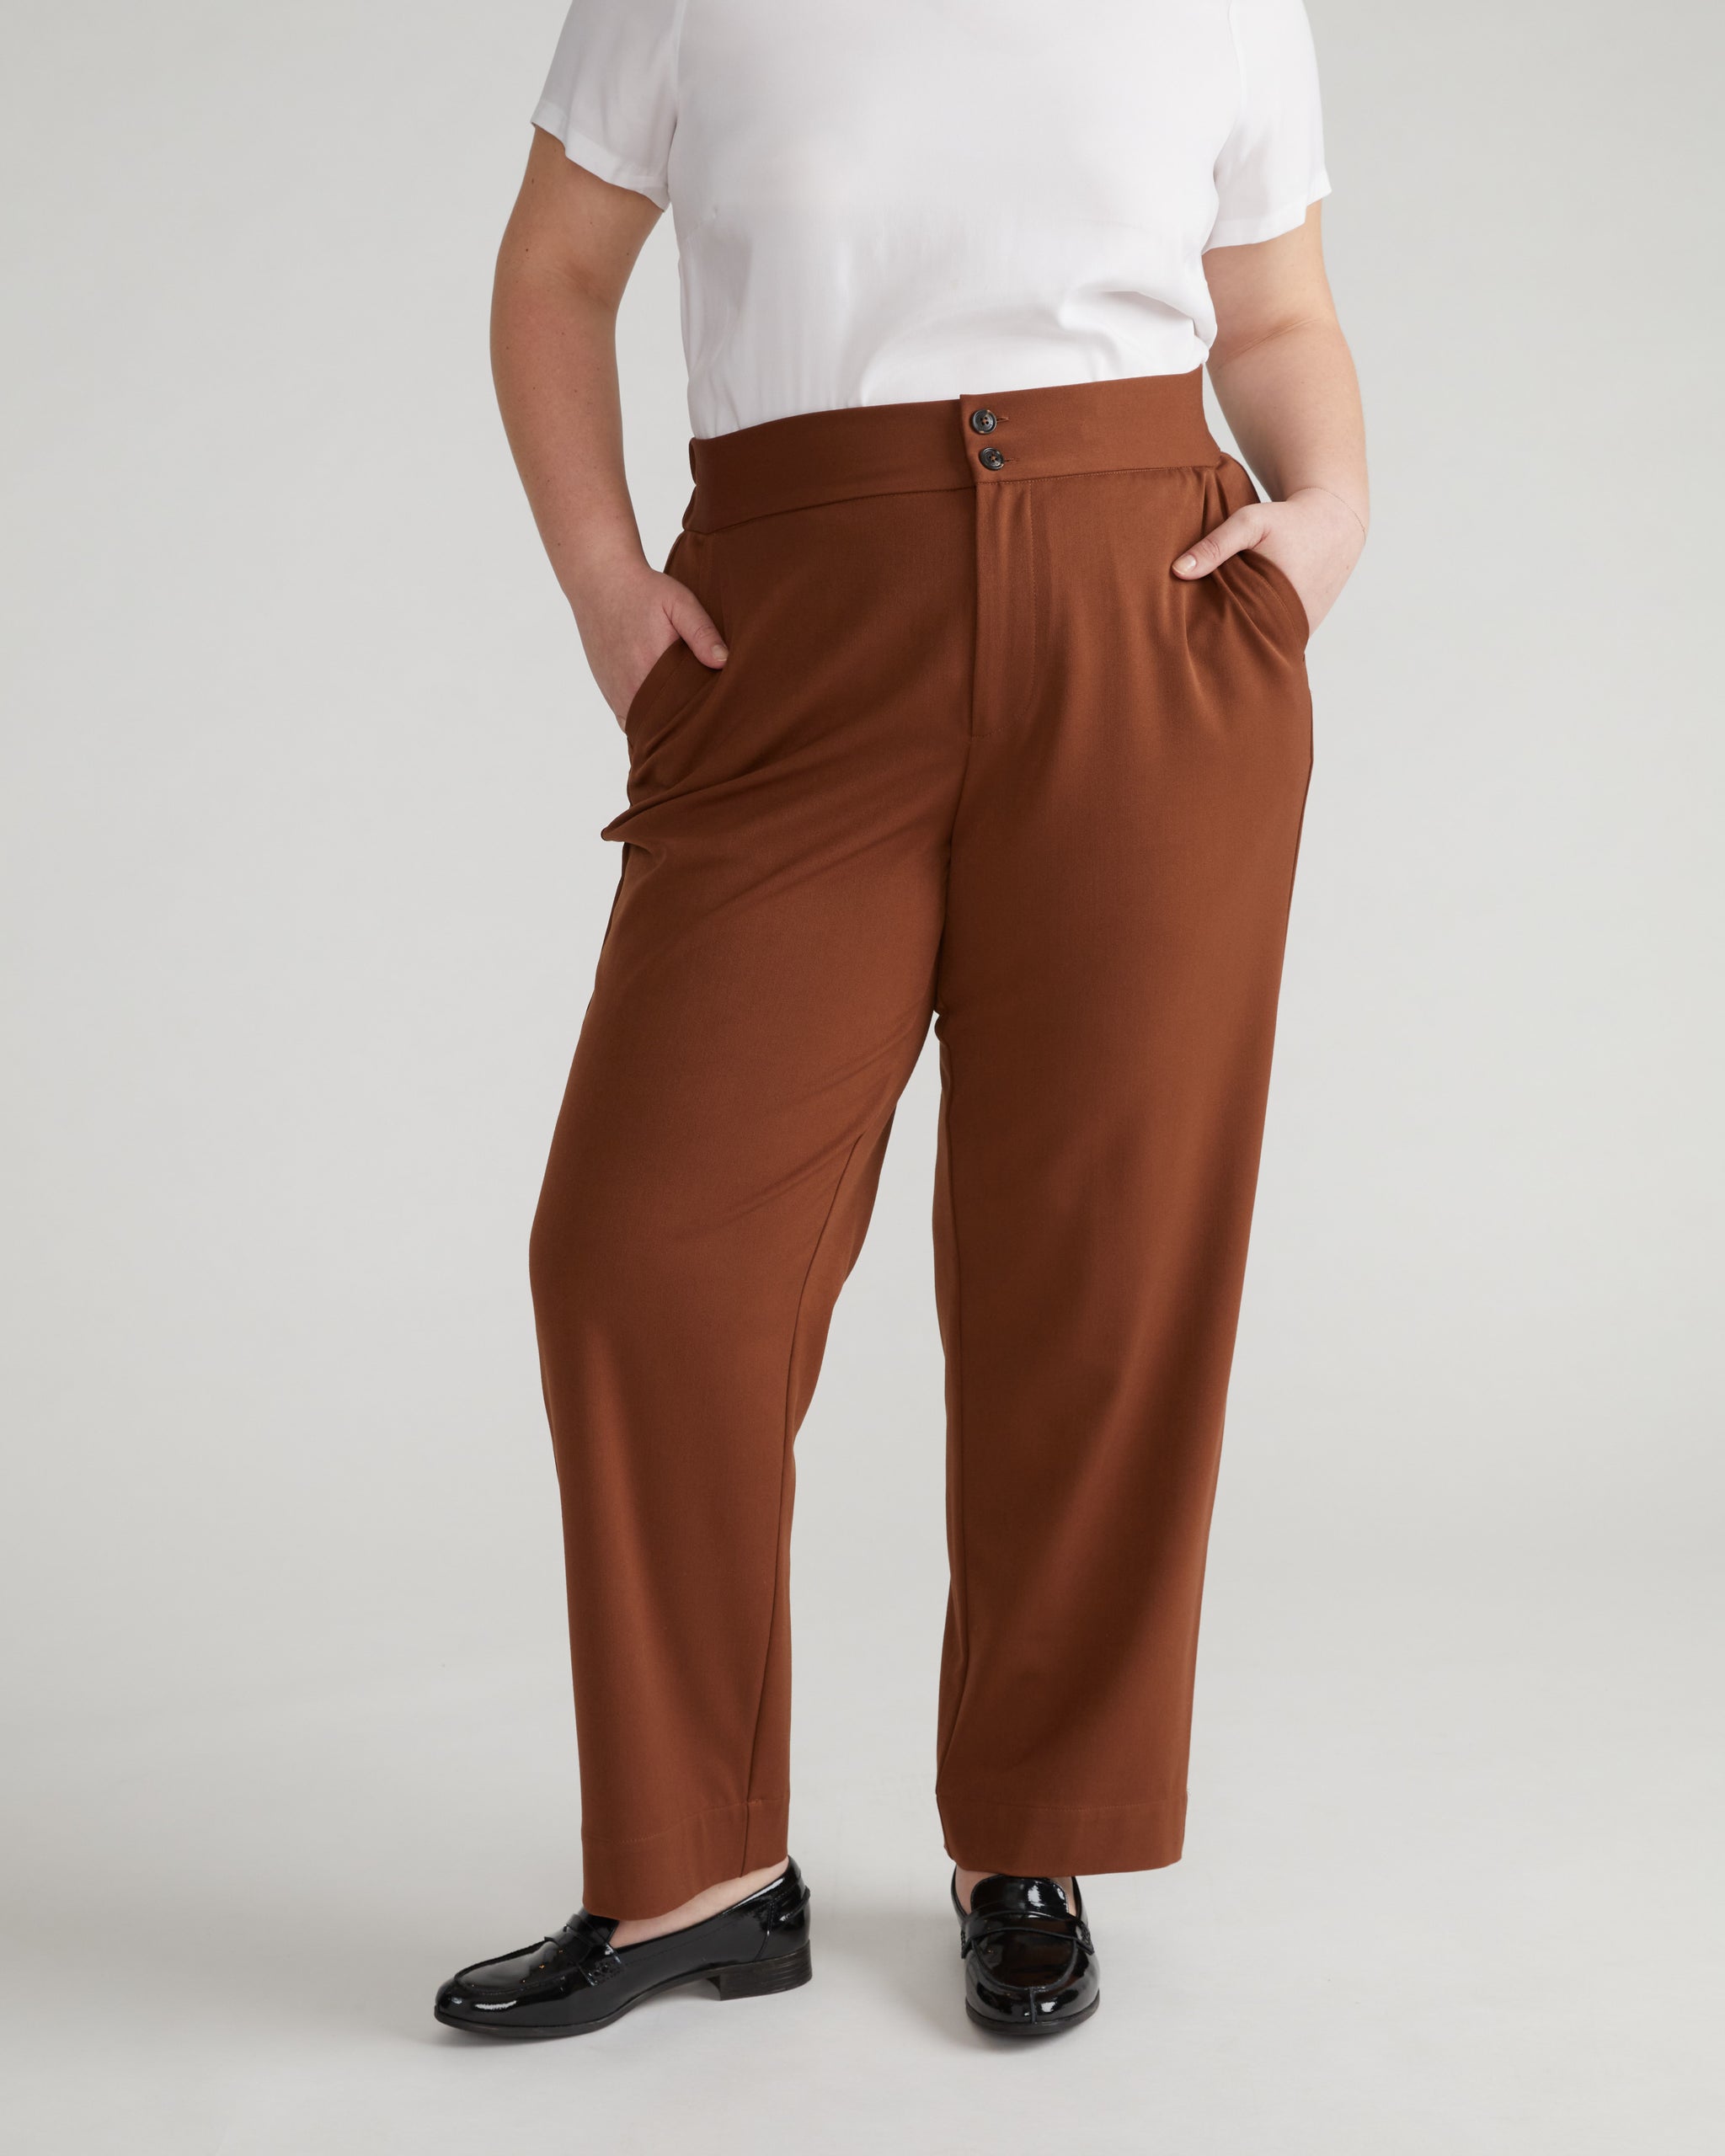 FAYT - an unbeatable duo 🤝 our Quinn top x Arie pants are